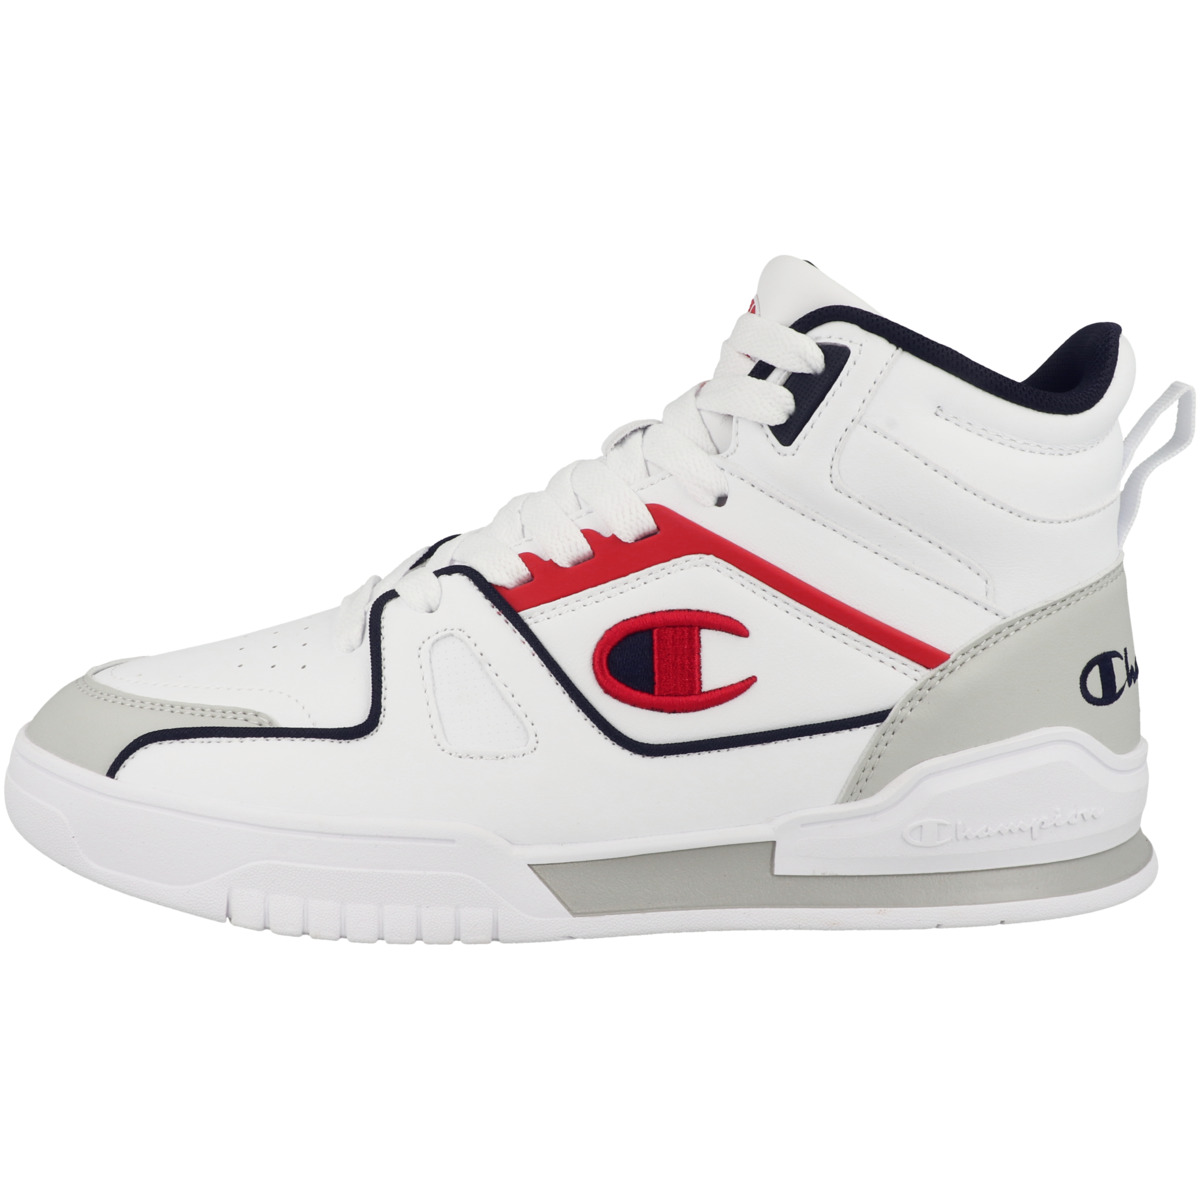 Champion 3 POINT MID Sneaker mid